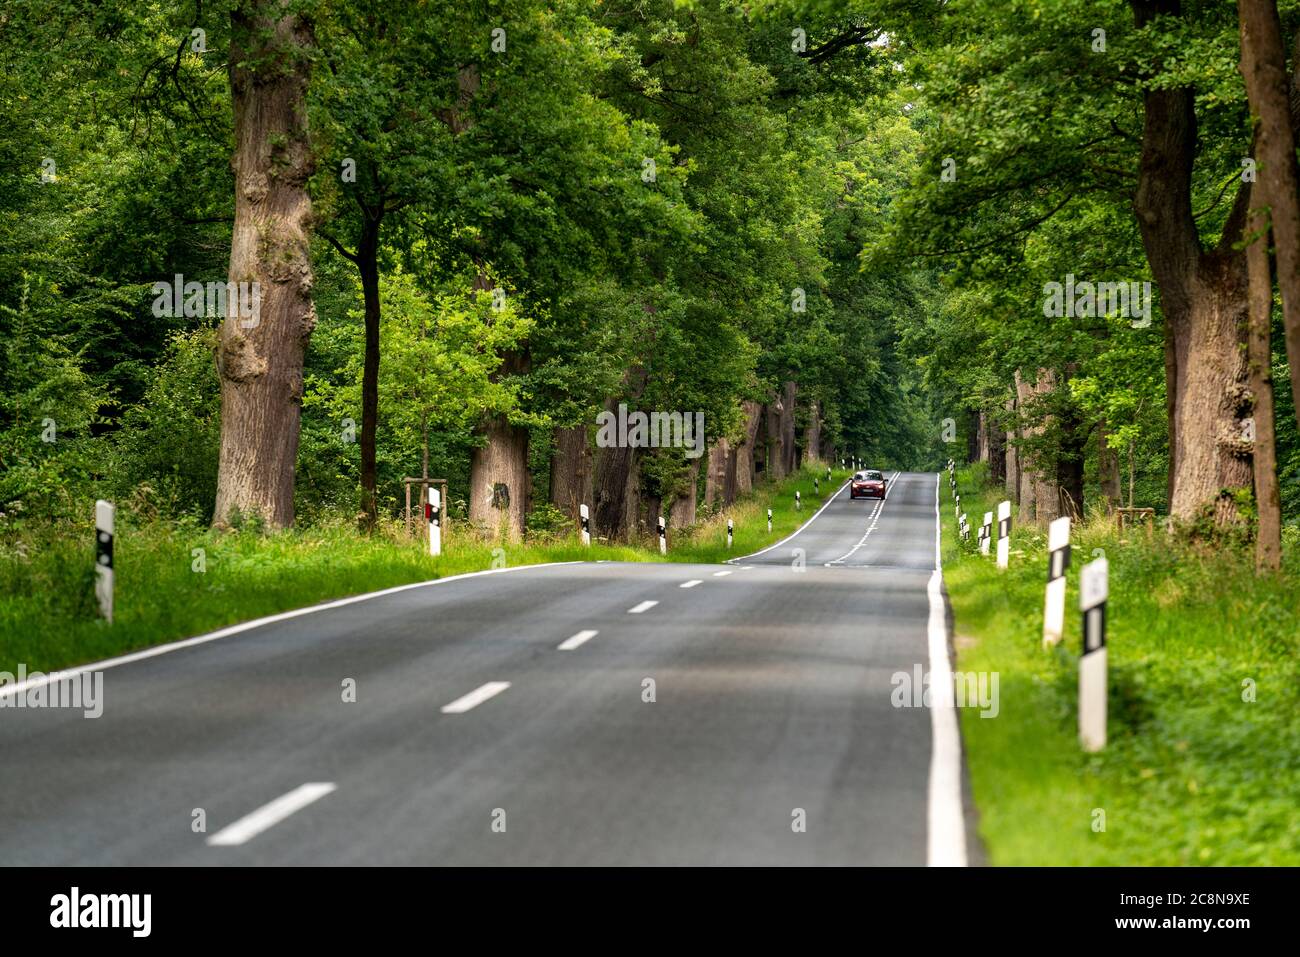 Country road through a forest, near Hofgeismar, in Hessen, Germany Stock Photo